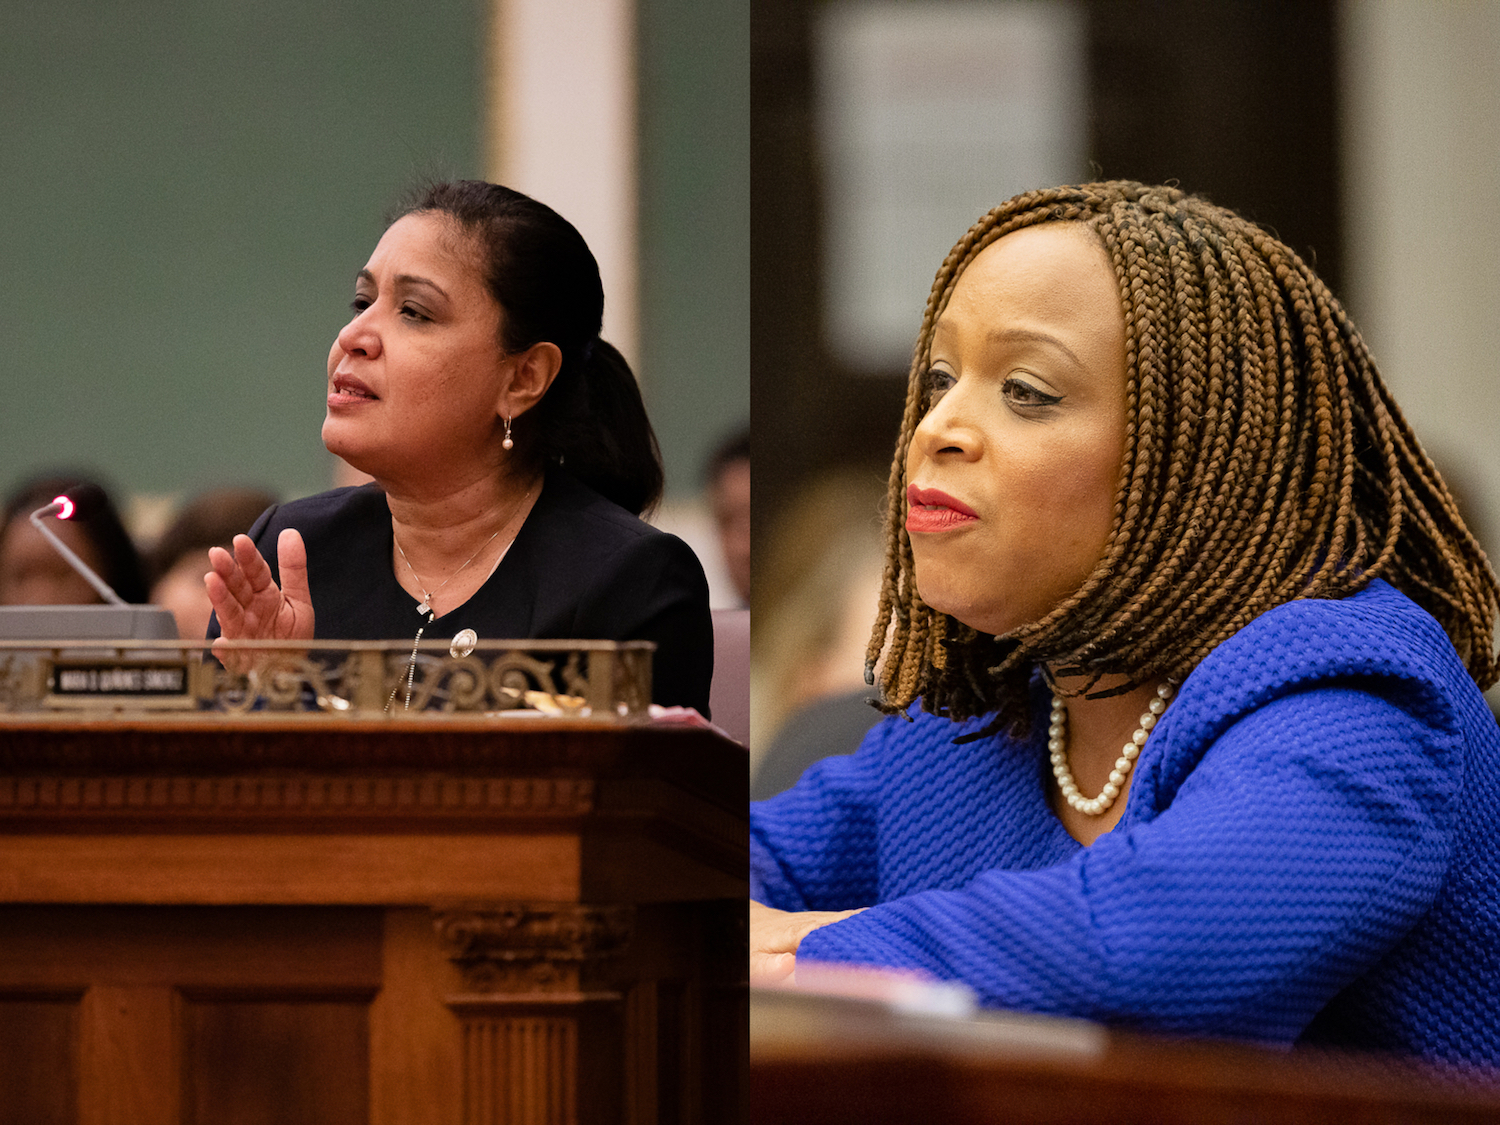 The Mixed Income Neighborhoods Overlay Bill is being spearheaded by Councilmembers Jamie Gauthier and María Quiñones-Sánchez. Photos: Jared Piper/PHLCouncil.